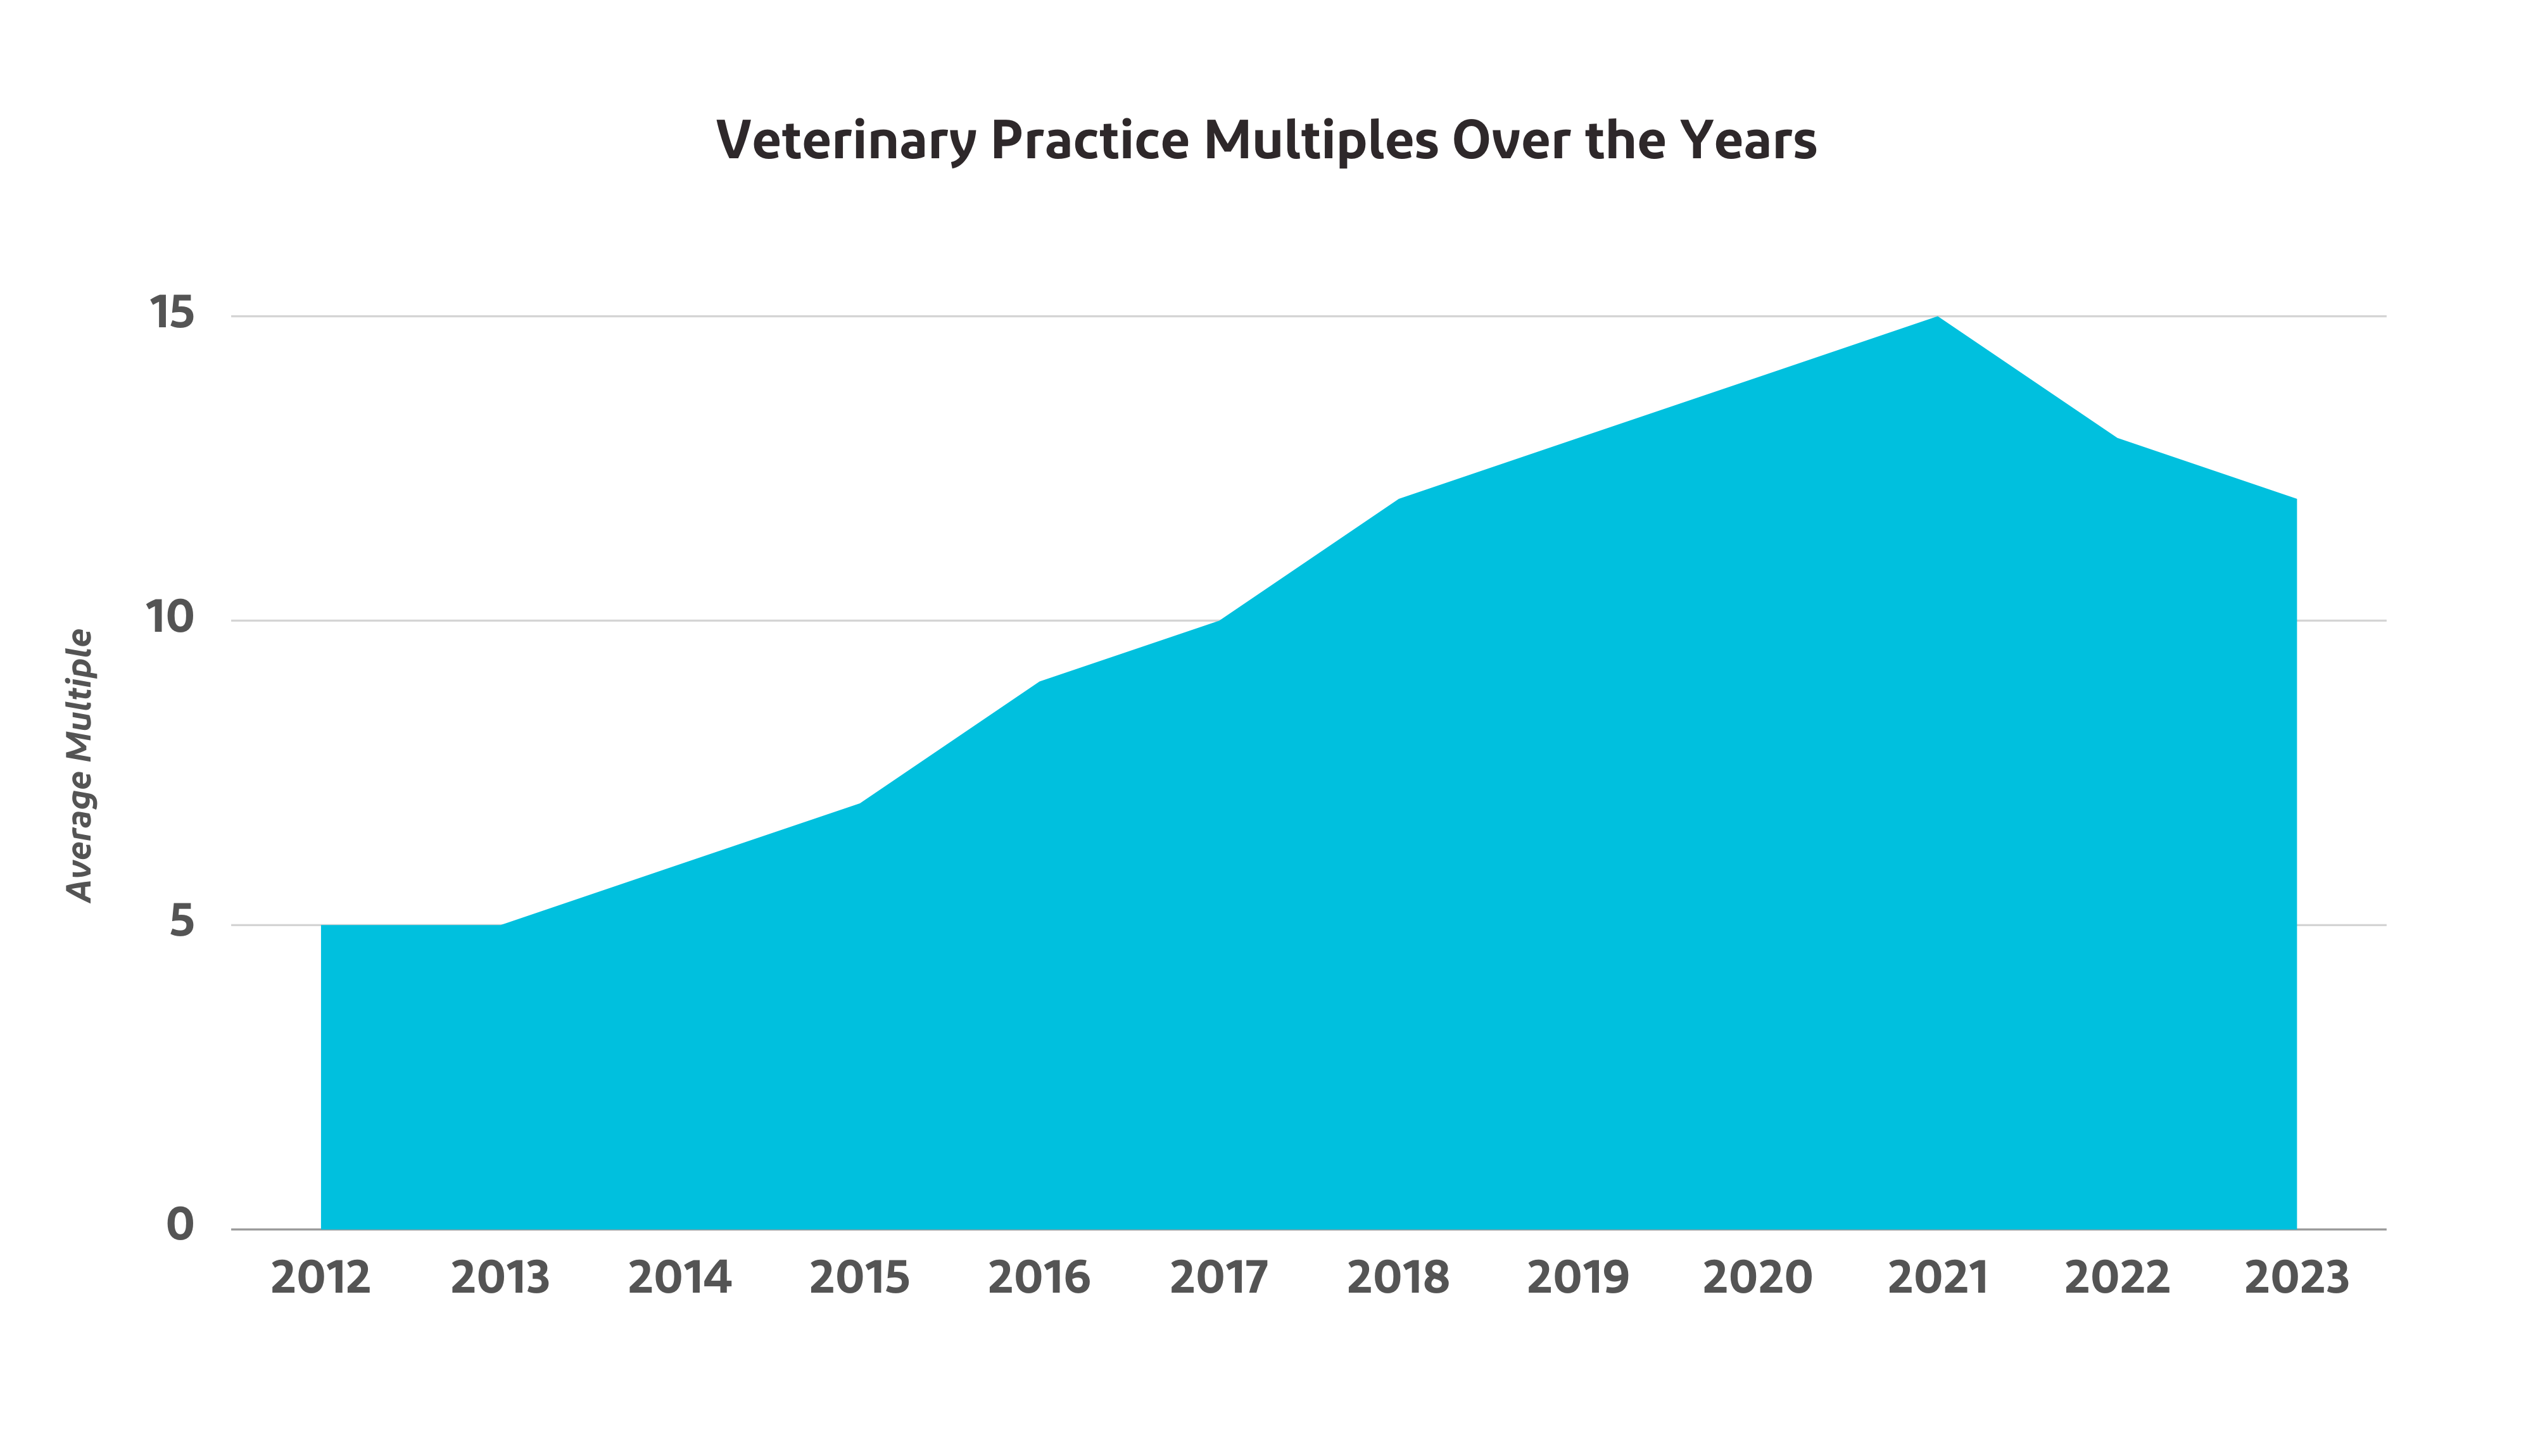 Veterinary Practice Multiples Over the Years